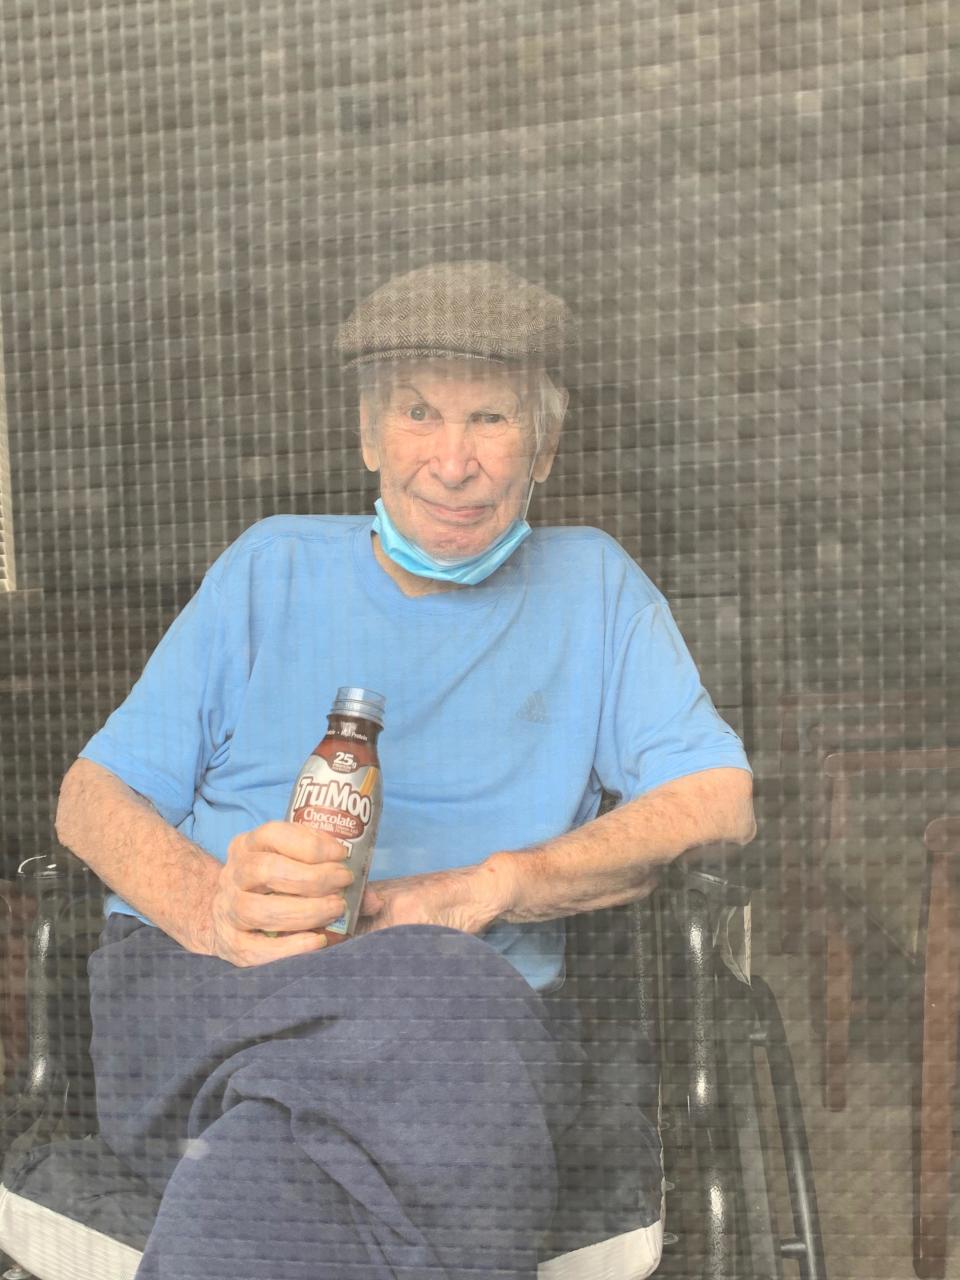 Francis Cashin, 94, pictured on Aug. 25, 2020, after surviving COVID-19.